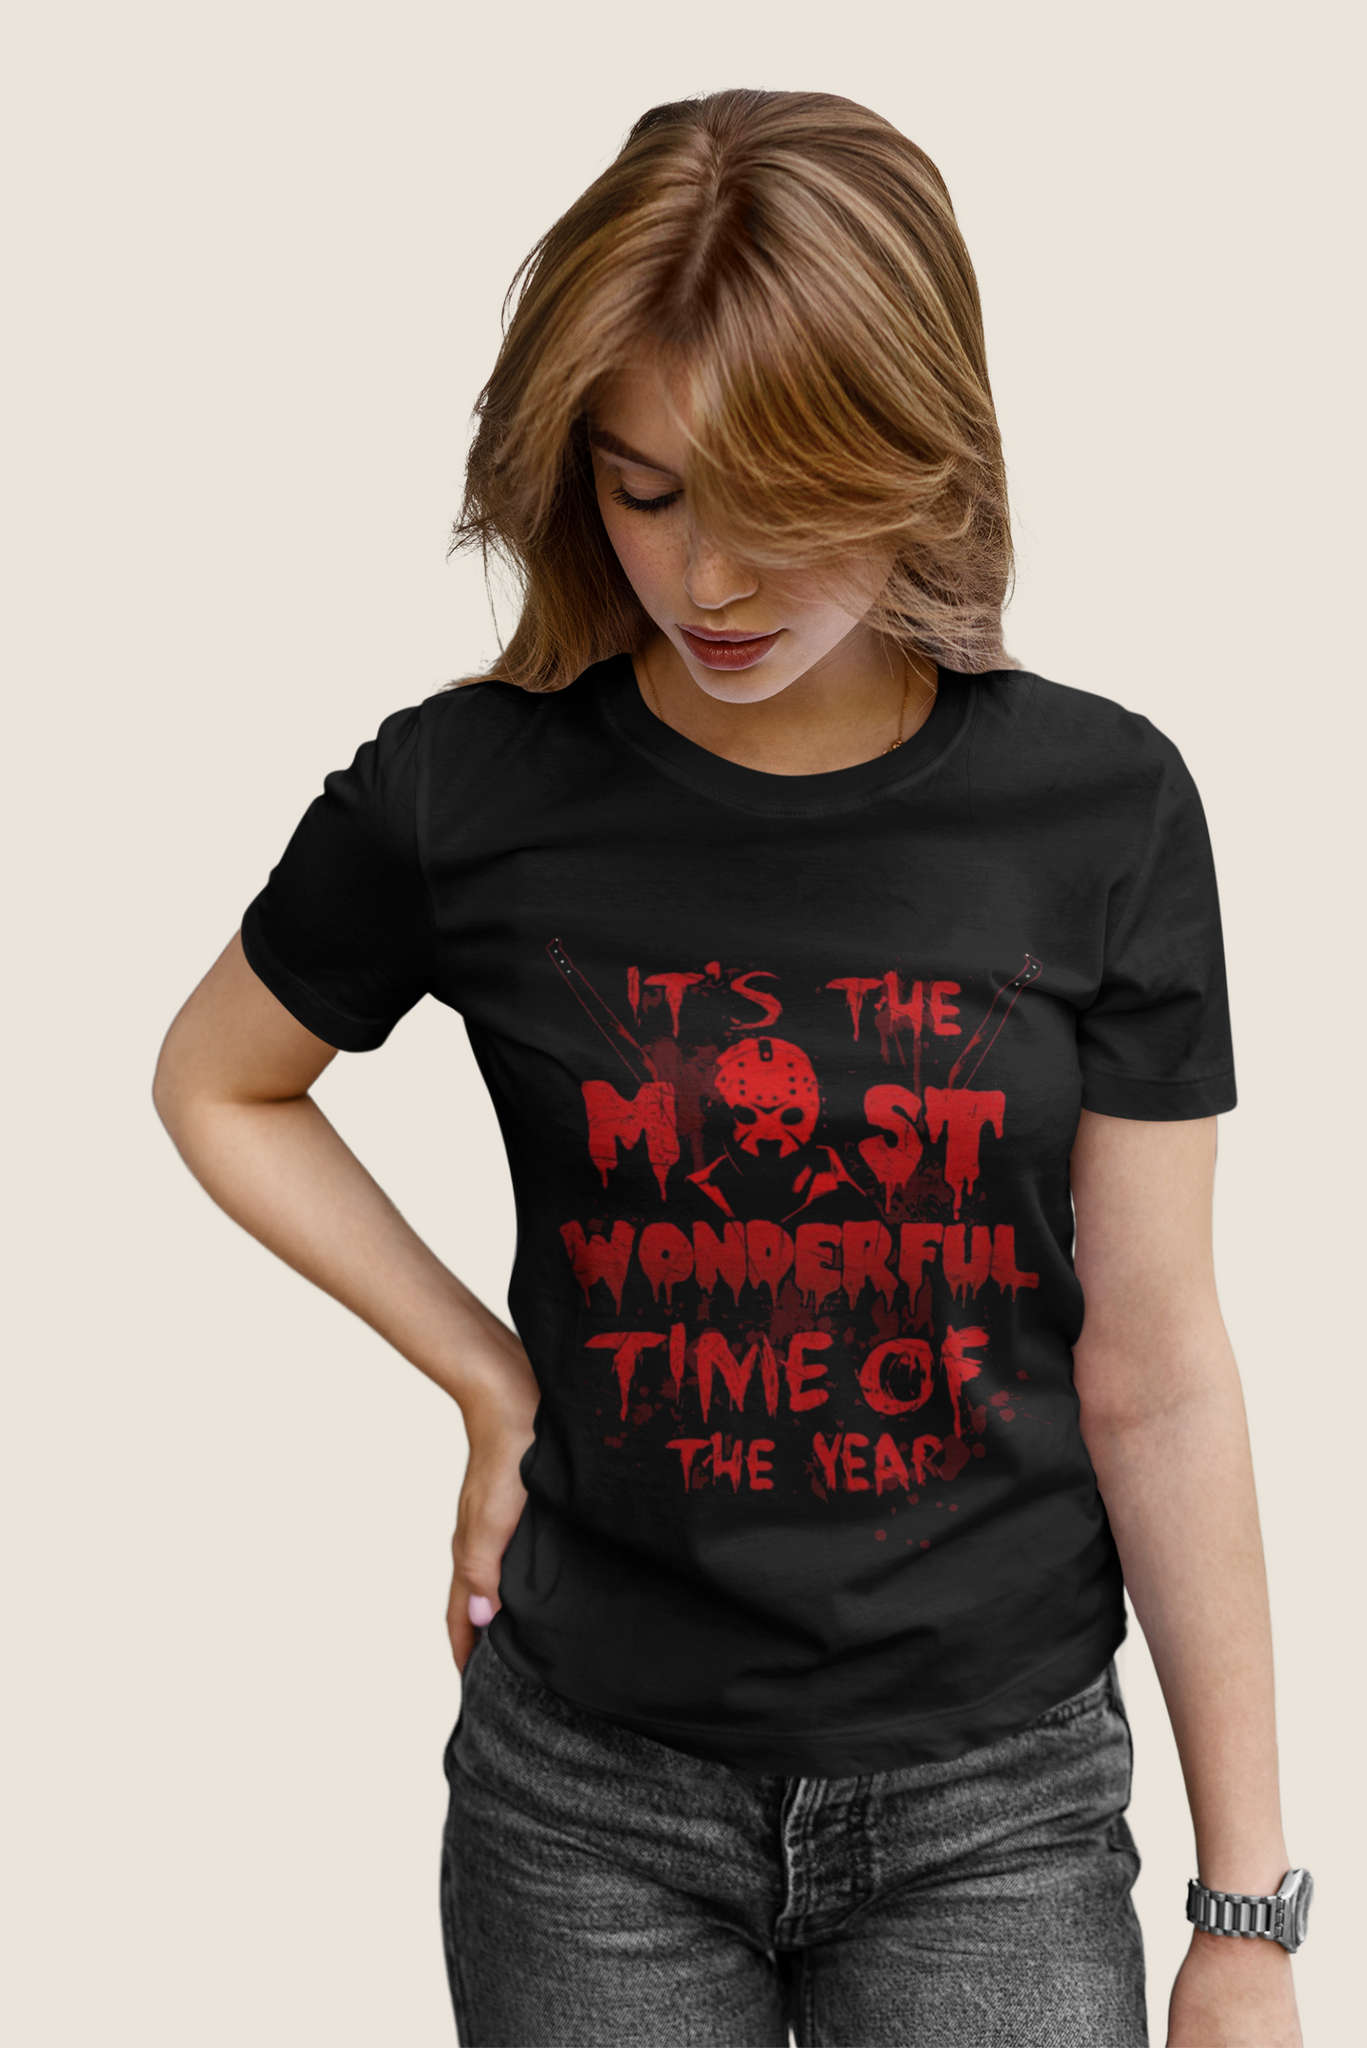 Friday 13th T Shirt, Its The Most Wonderful Time Of The Year T Shirt, Jason Voorhees Shirt, Halloween Gifts